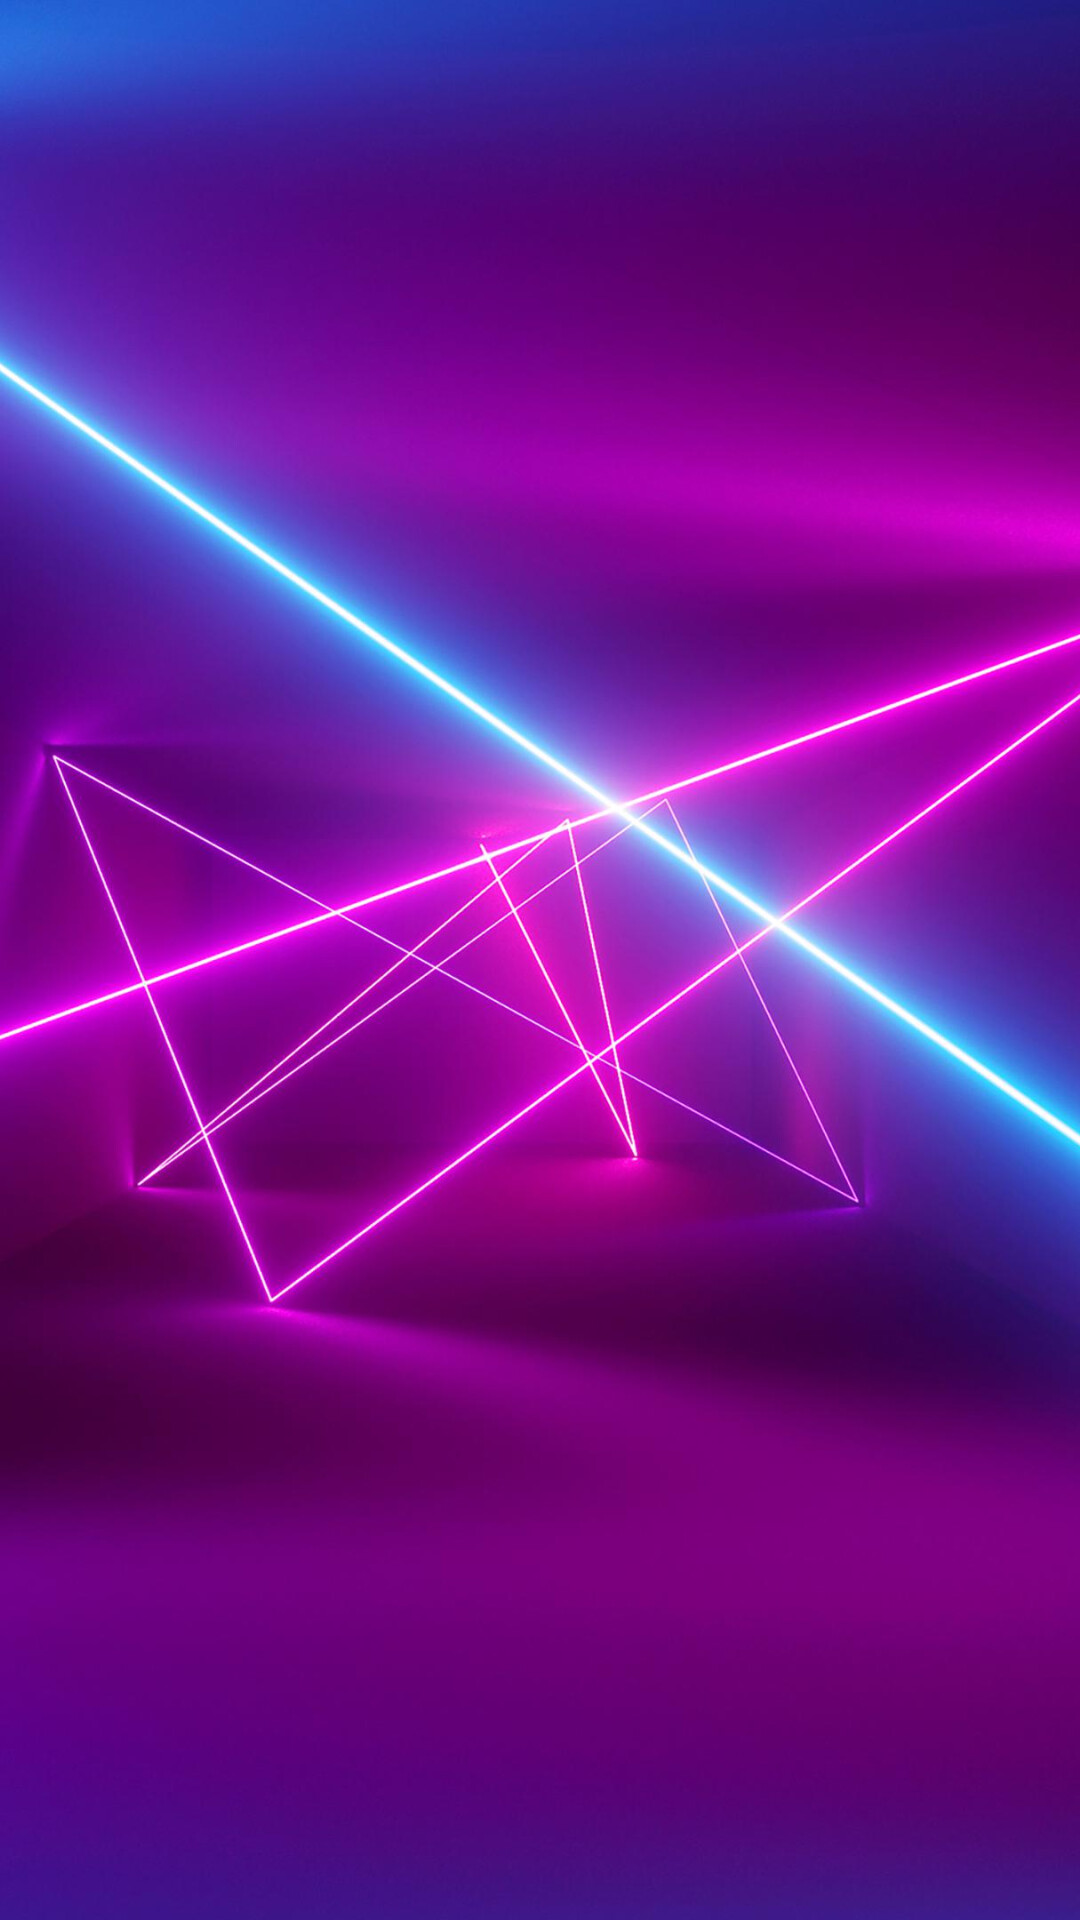 Triangle: Neon laser rays, Rectangular prism, Acute angles. 1080x1920 Full HD Wallpaper.